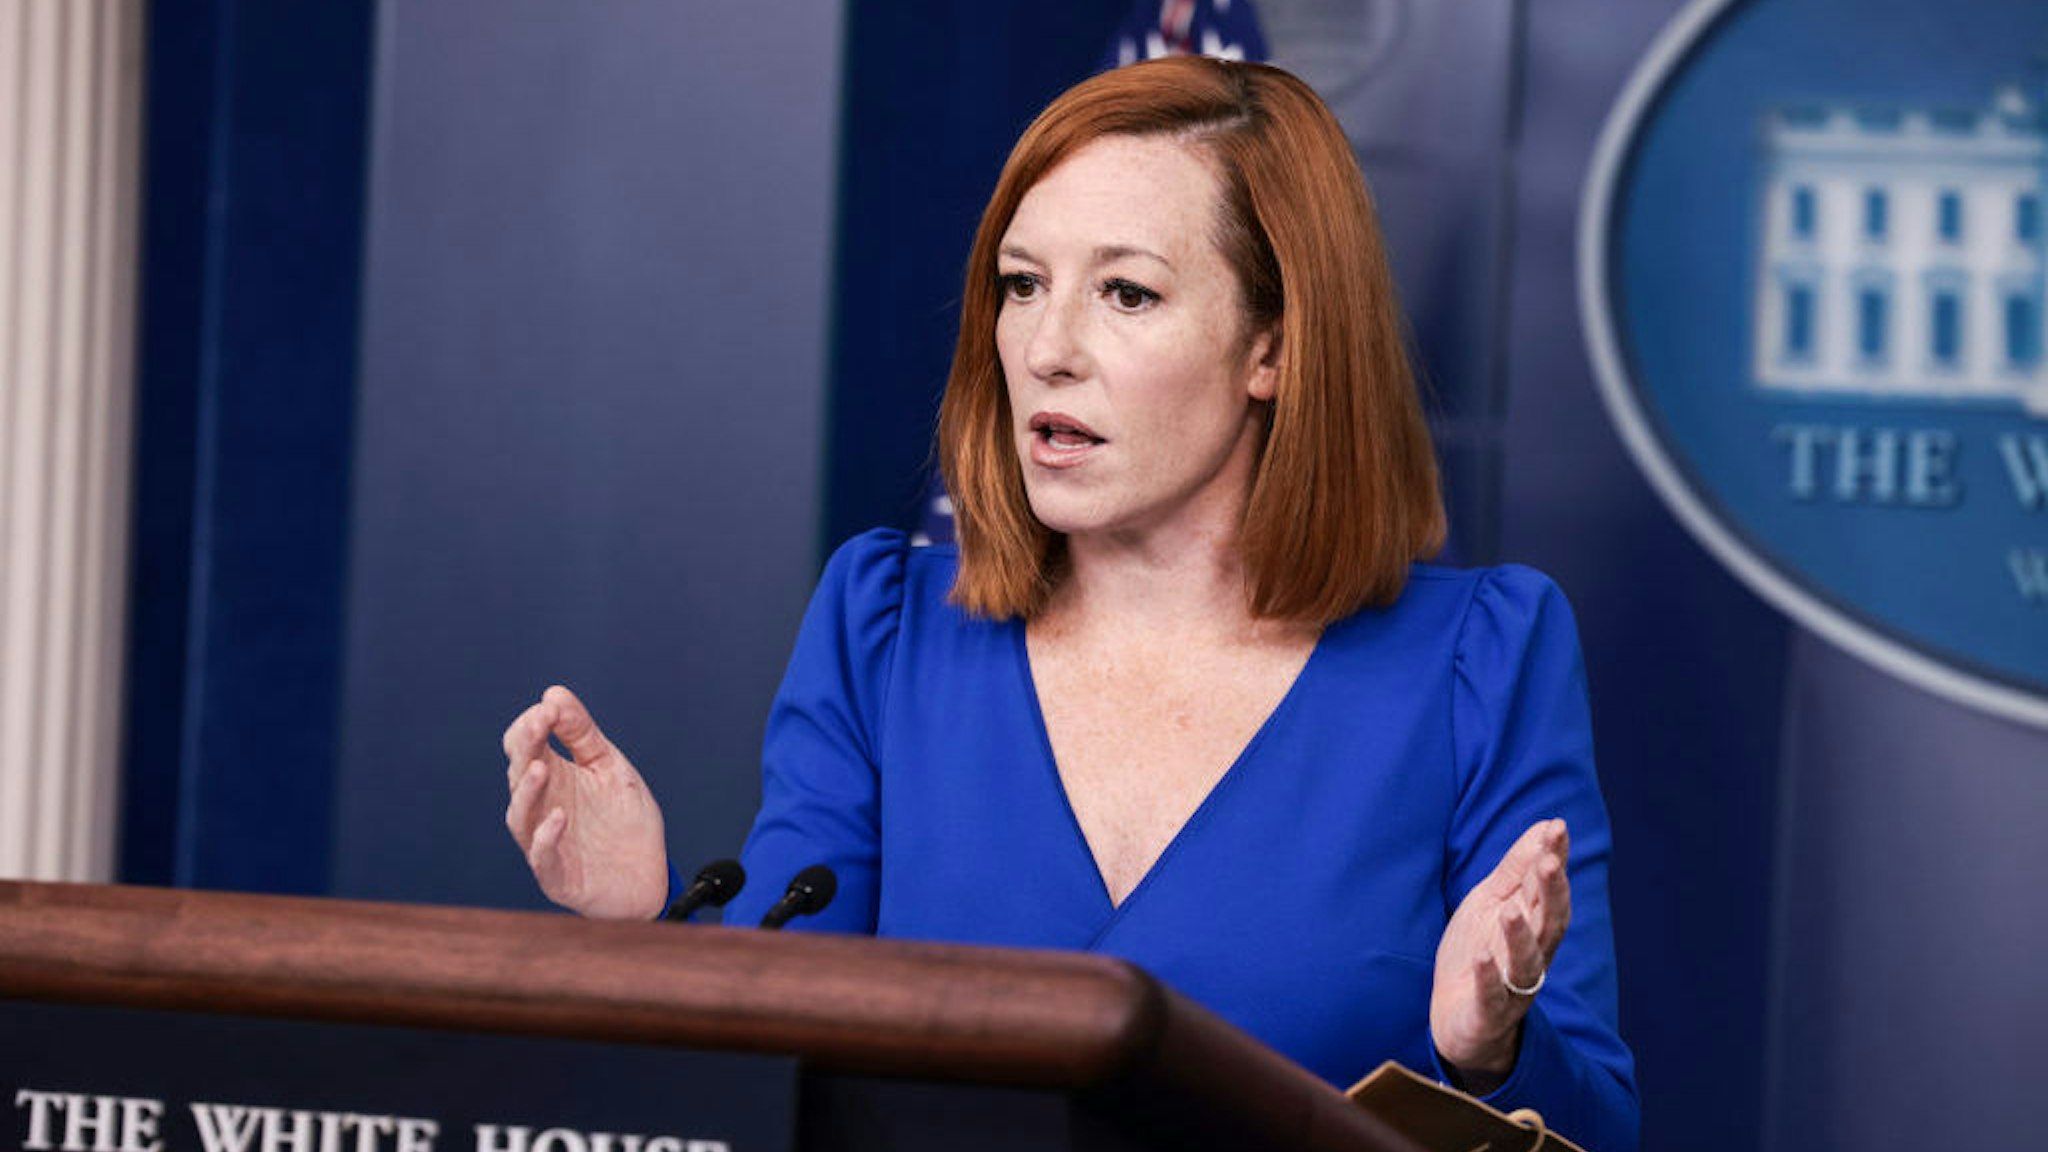 WASHINGTON, DC - OCTOBER 01: White House Press Secretary Jen Psaki gestures as she speaks at a press briefing in the James Brady Press Briefing Room of the White House on October 01, 2021 in Washington, DC. Later today U.S. President Joe Biden will go to Capitol Hill to attend a meeting with the House Democratic Caucus. (Photo by Anna Moneymaker/Getty Images)